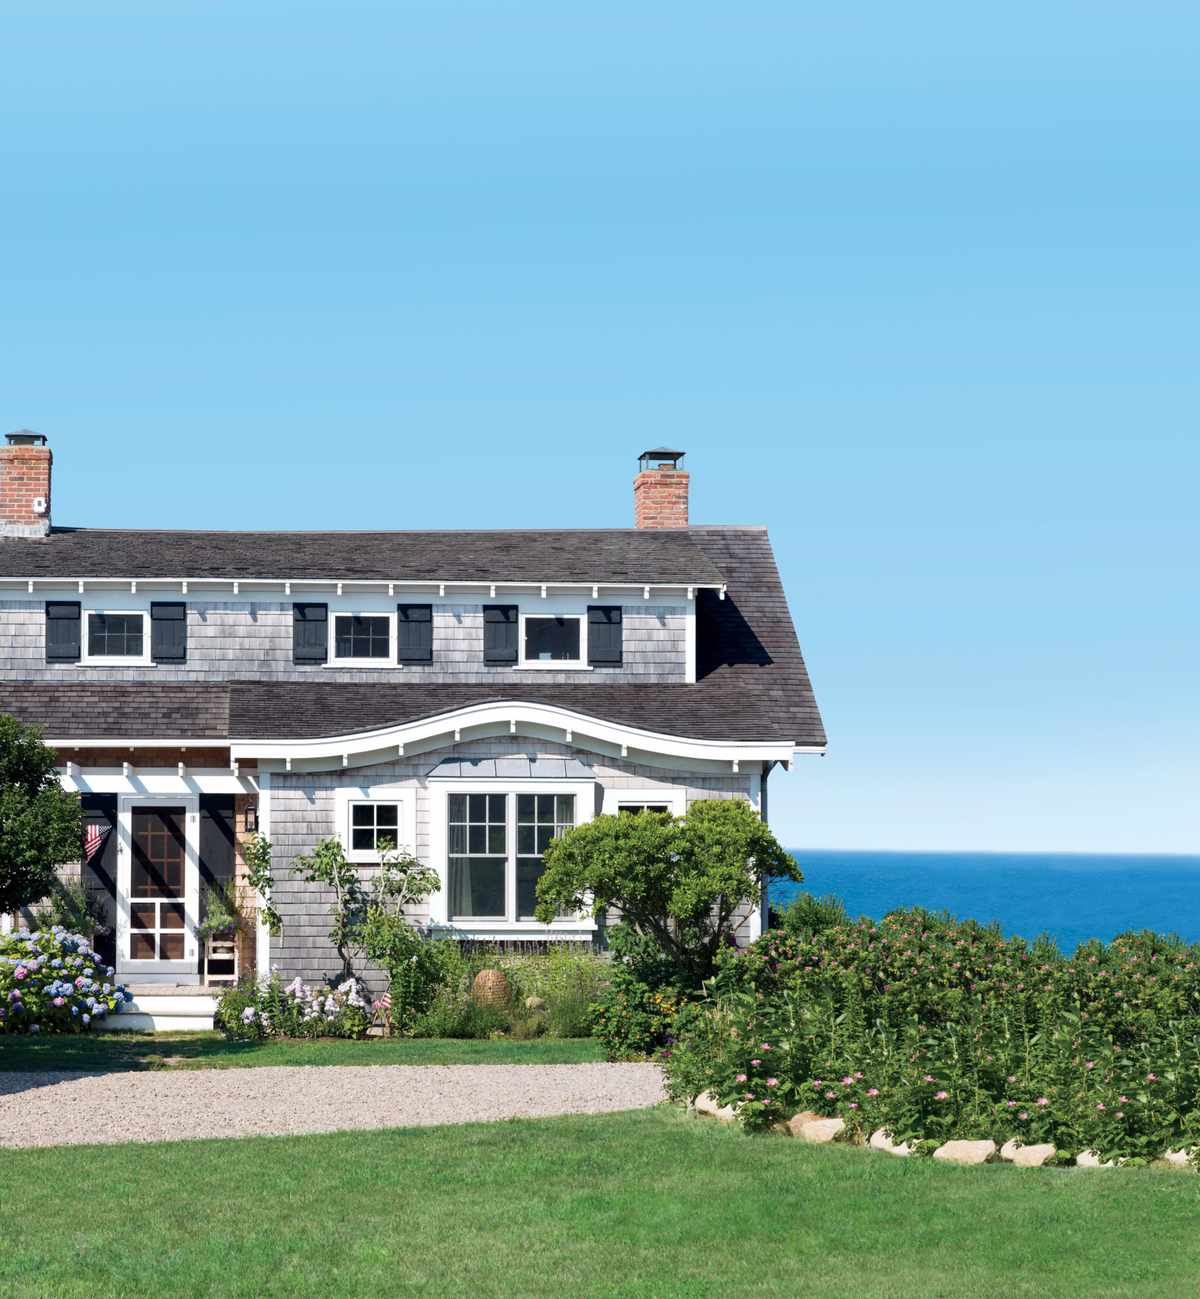 Cape Cod-style beach cottage in Orleans, Massachusettes with gray shingles, black shutters, and a water view.